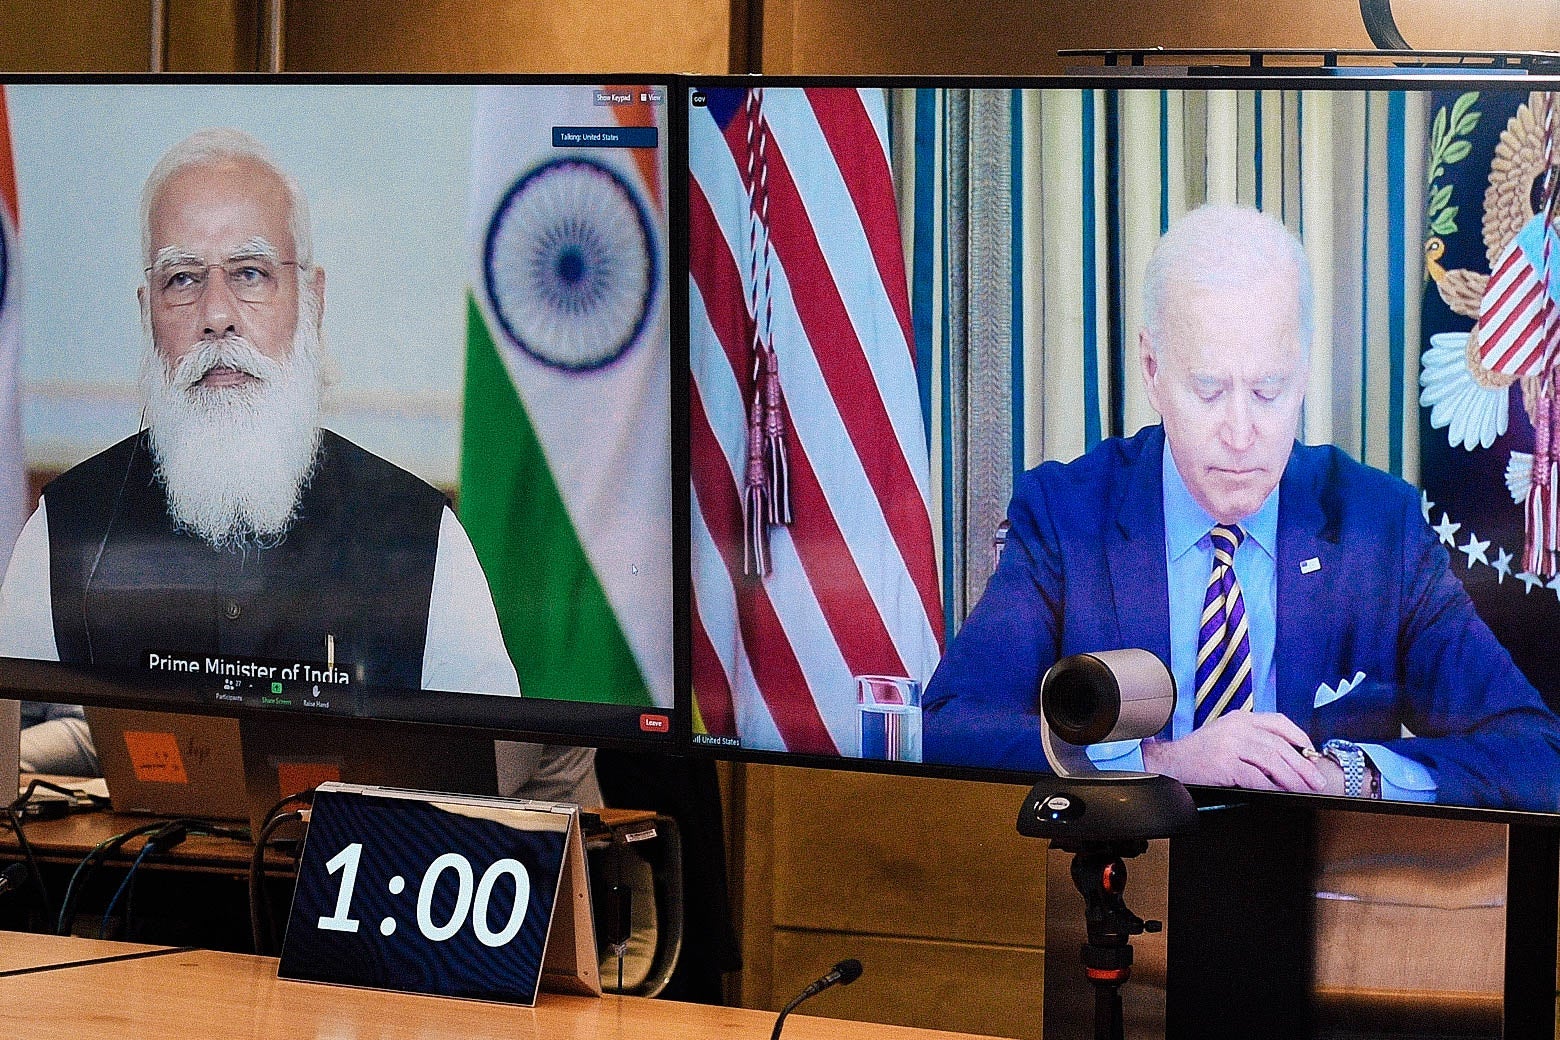 Modi and Biden seen in a videoconference on two TV screens.